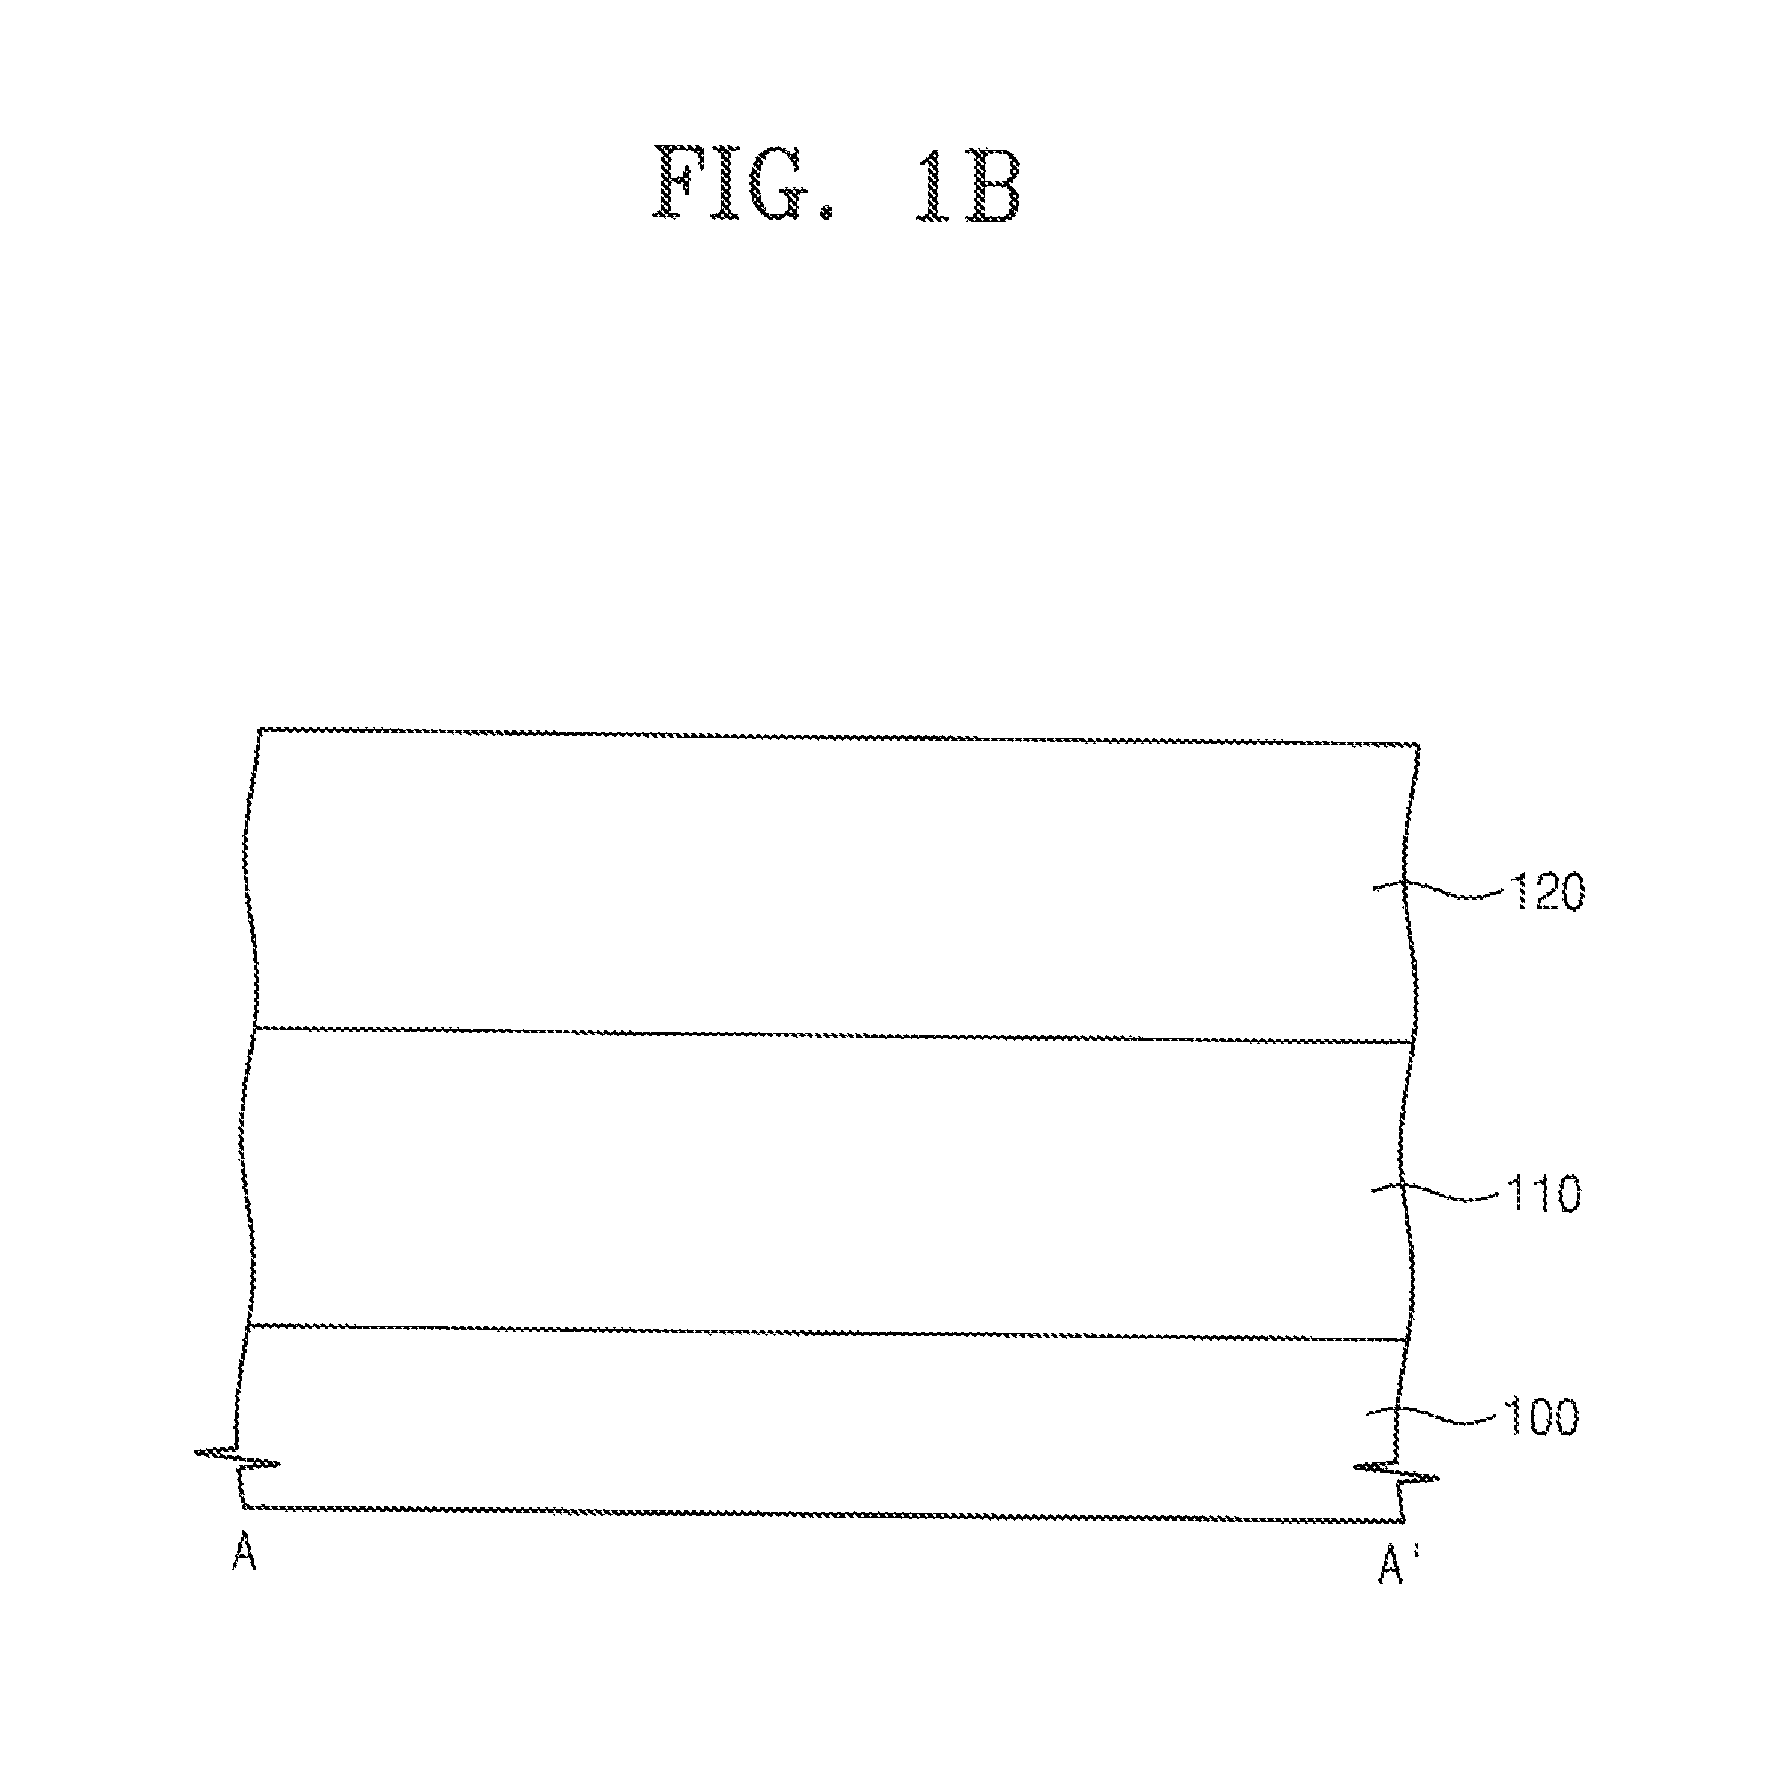 Method for fabricating semiconductor devices